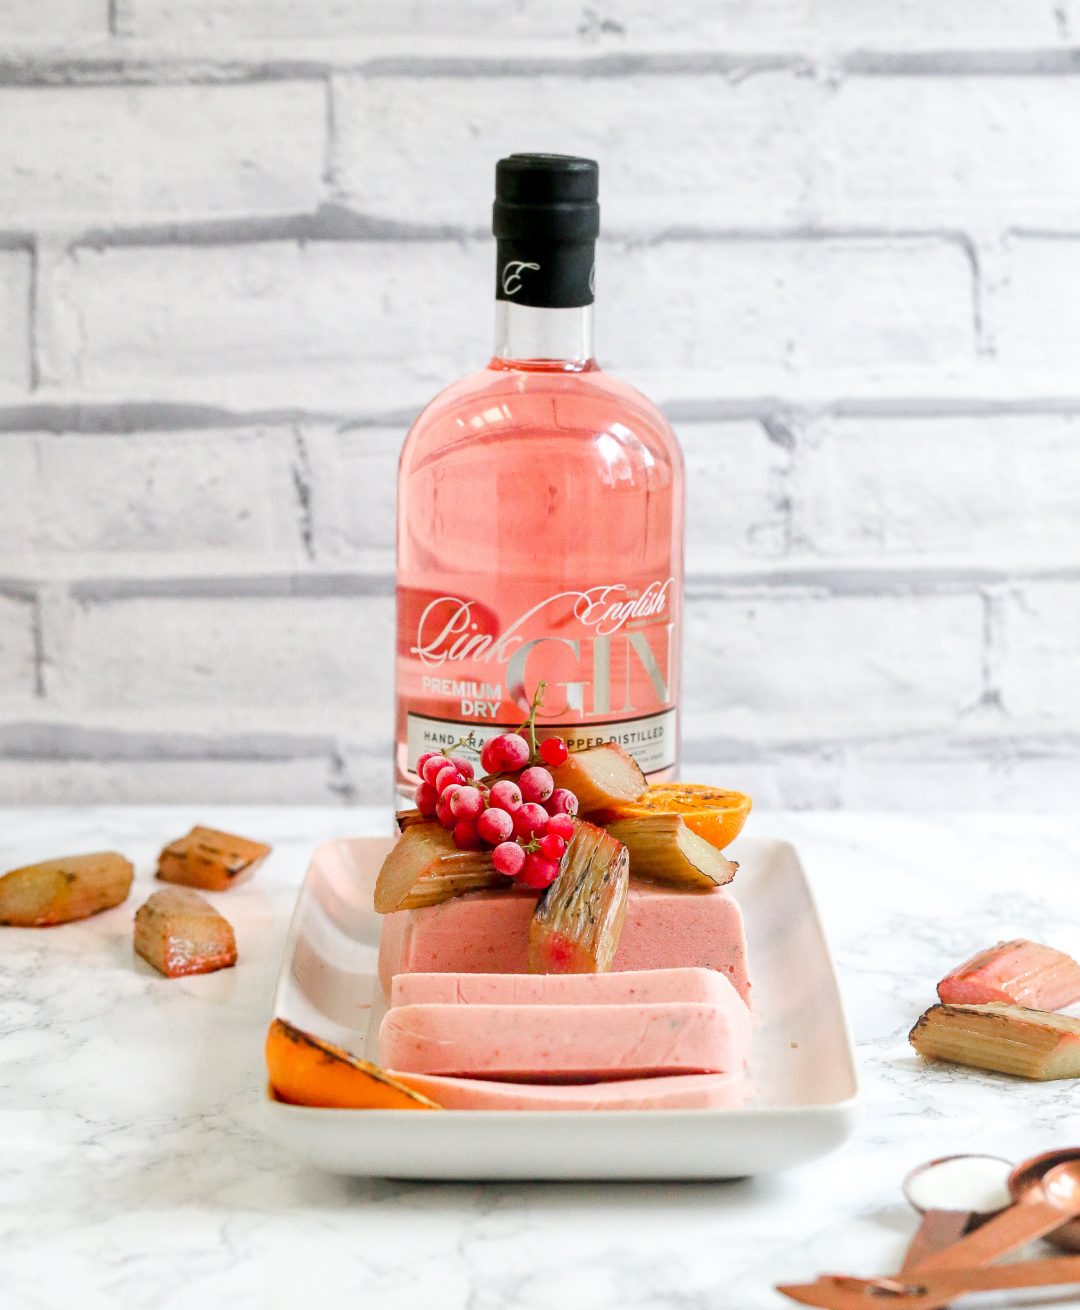 Pink gin and rhubarb parfait